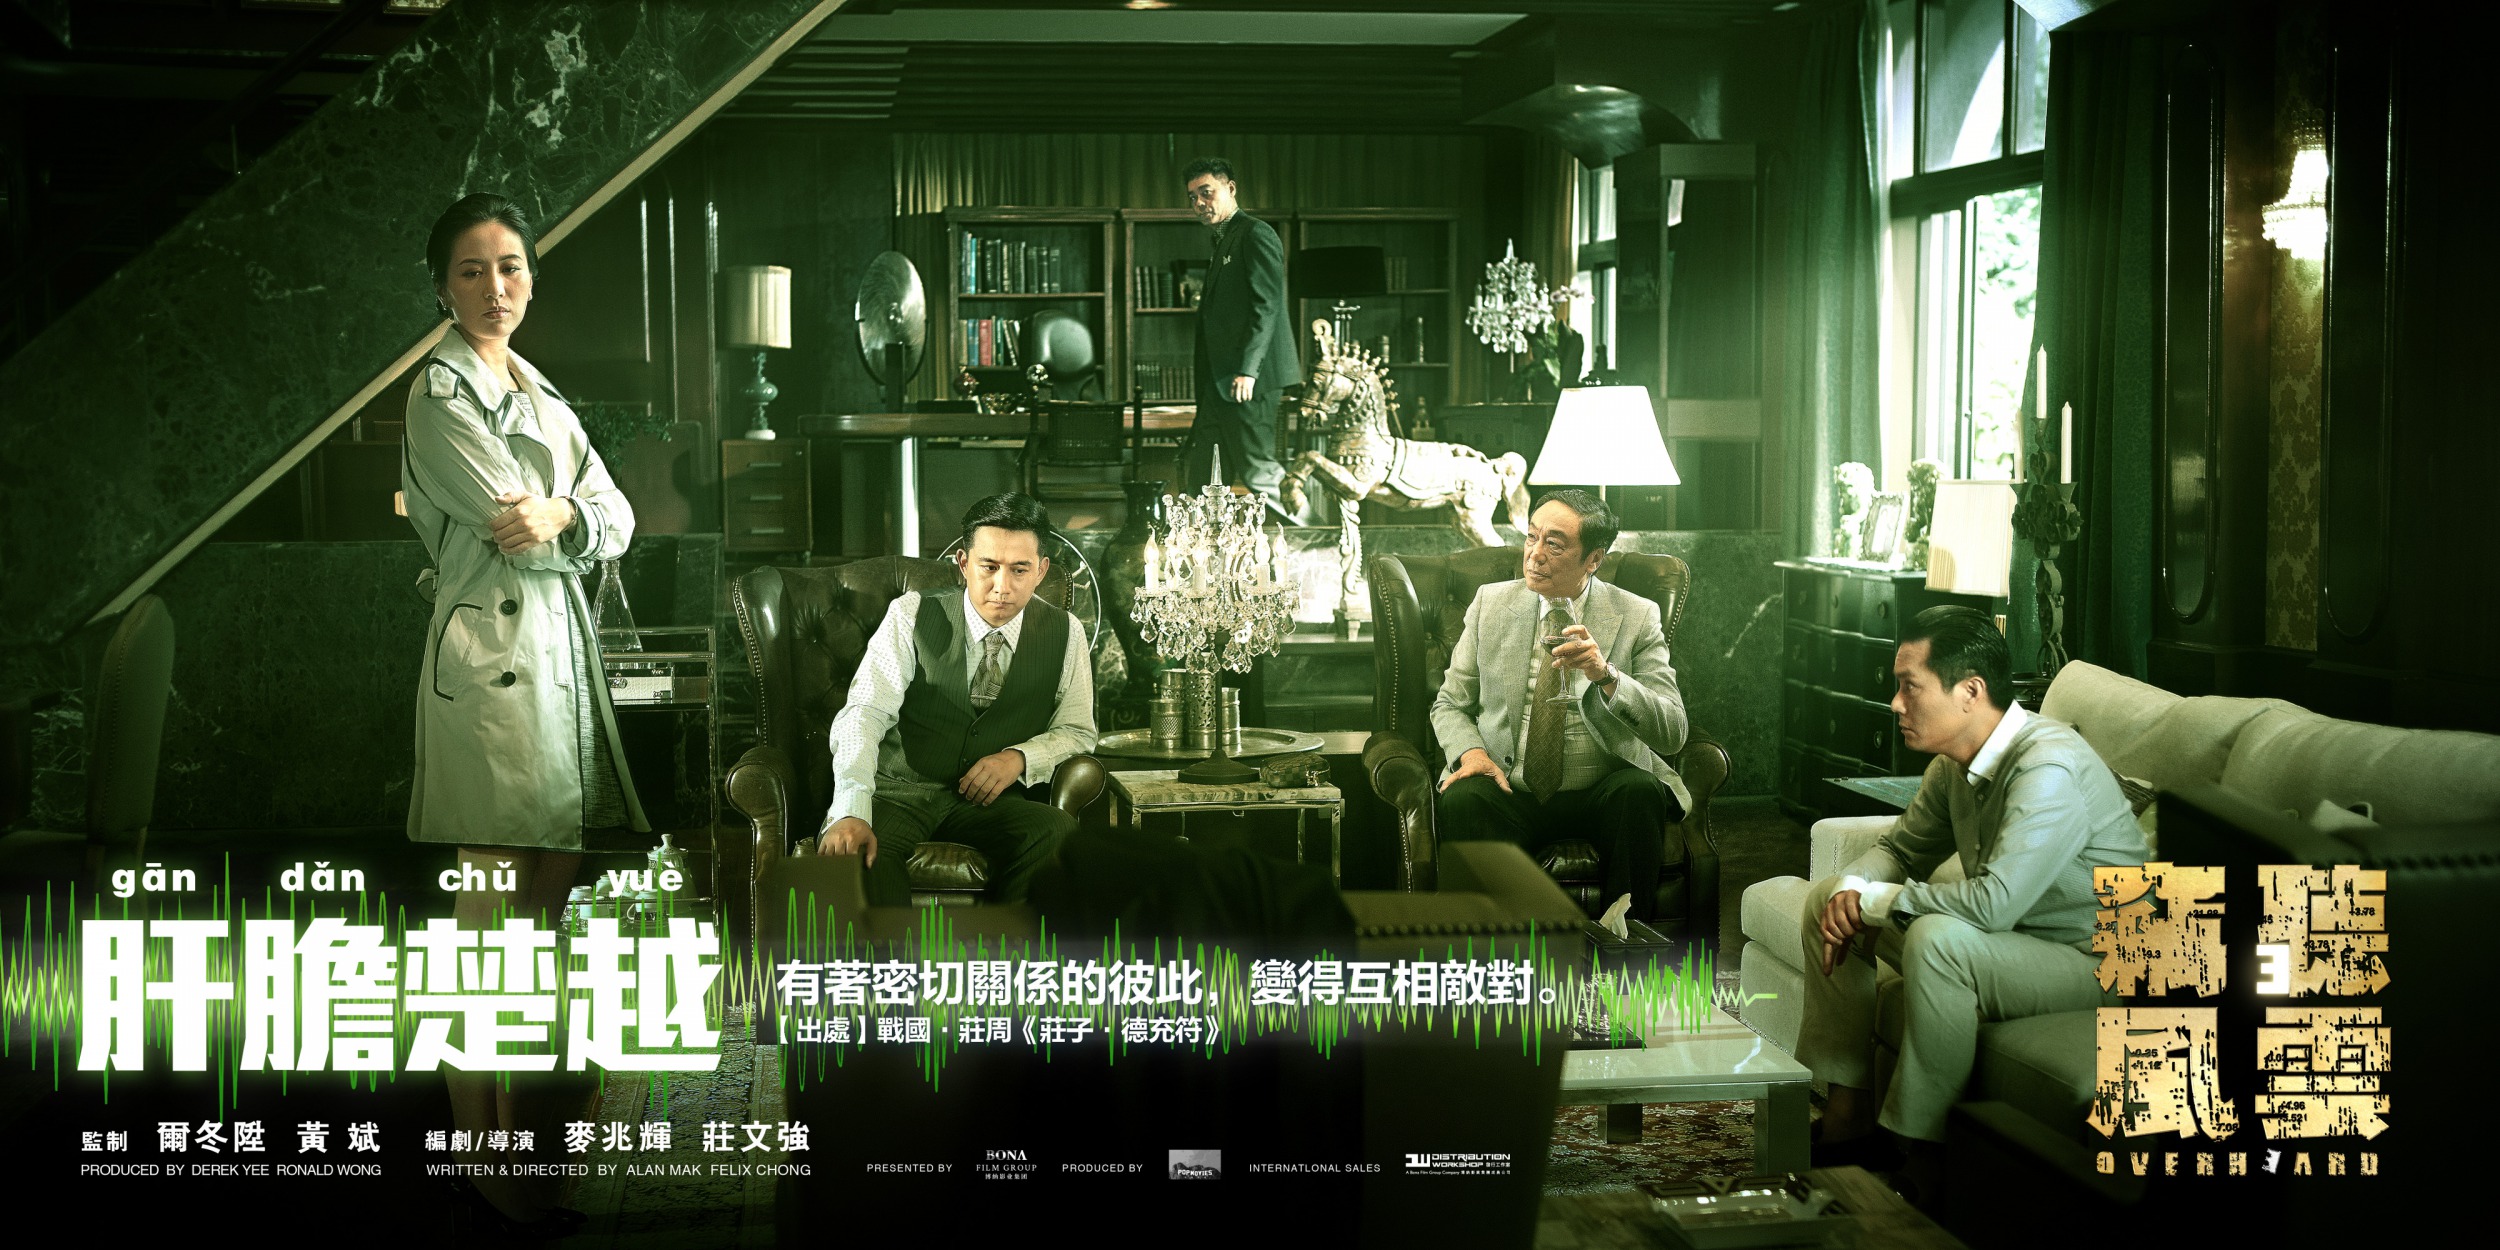 Mega Sized Movie Poster Image for Sit ting fung wan 3 (#4 of 7)